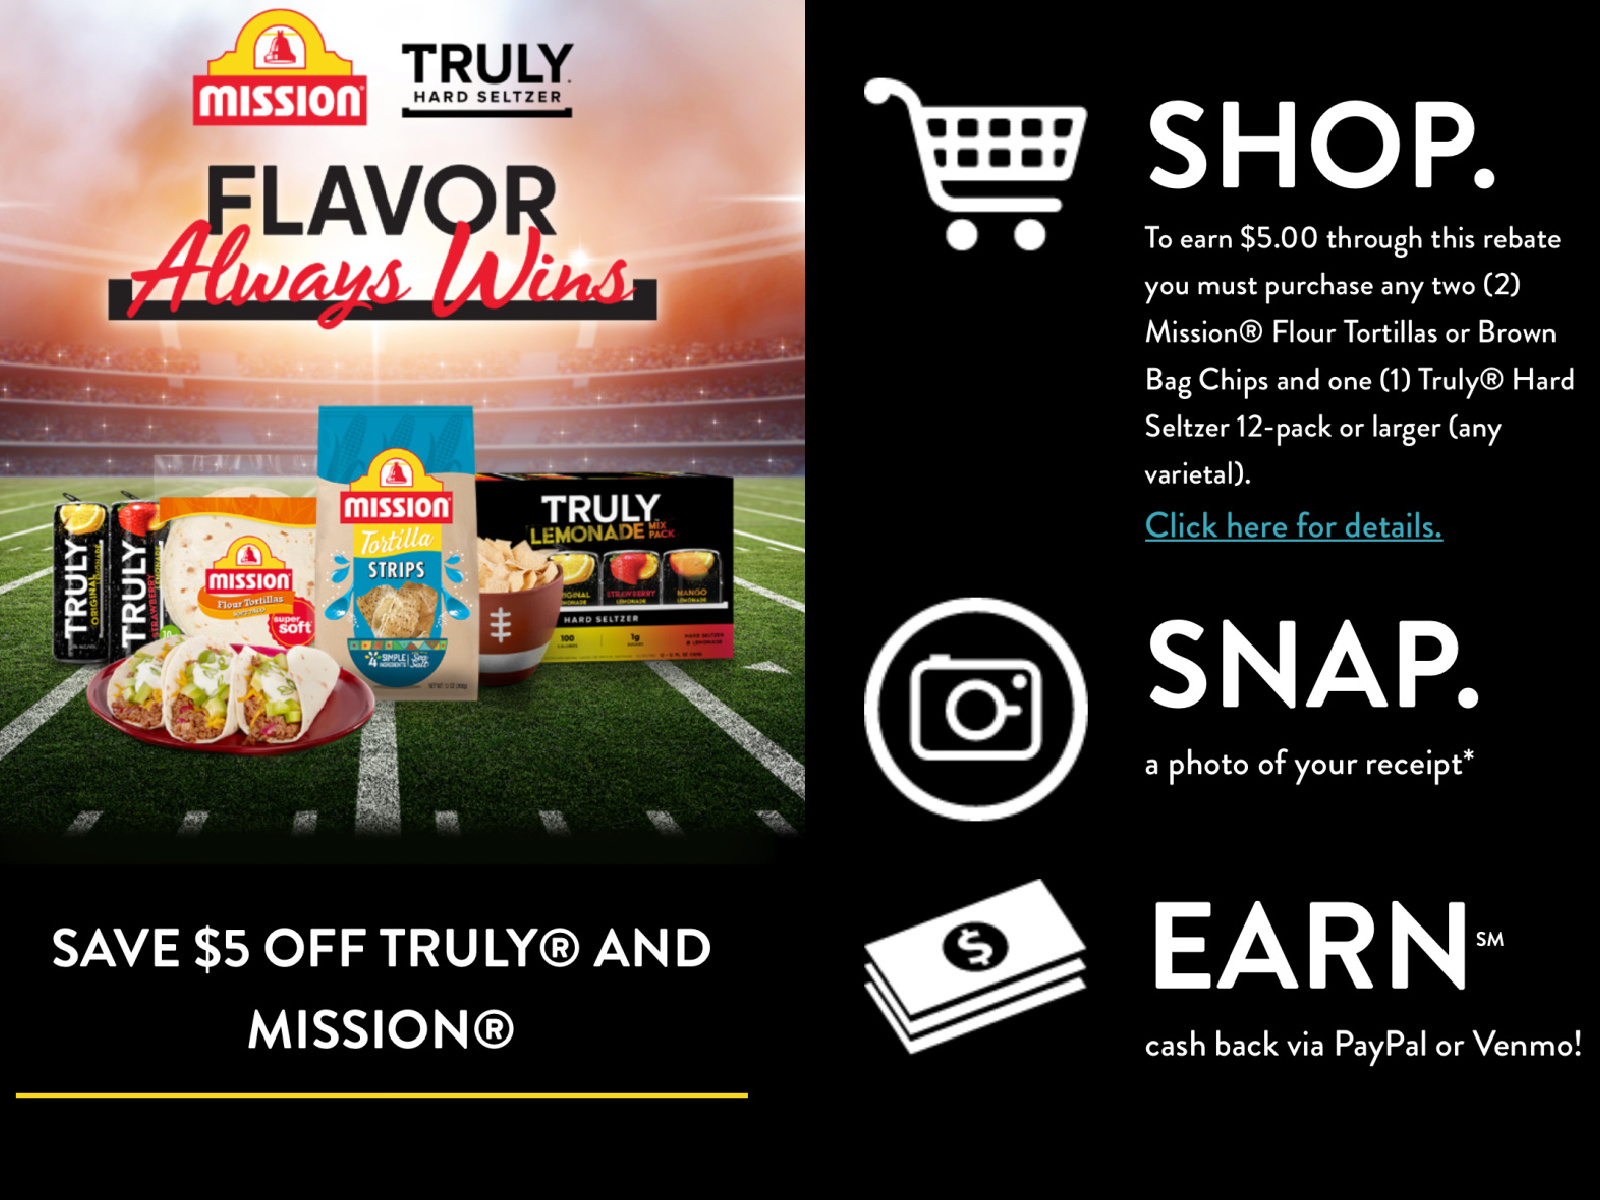 Save $5 When You Purchase Truly® Hard Seltzer & Mission® Products – Shop, Snap & Earn At Publix